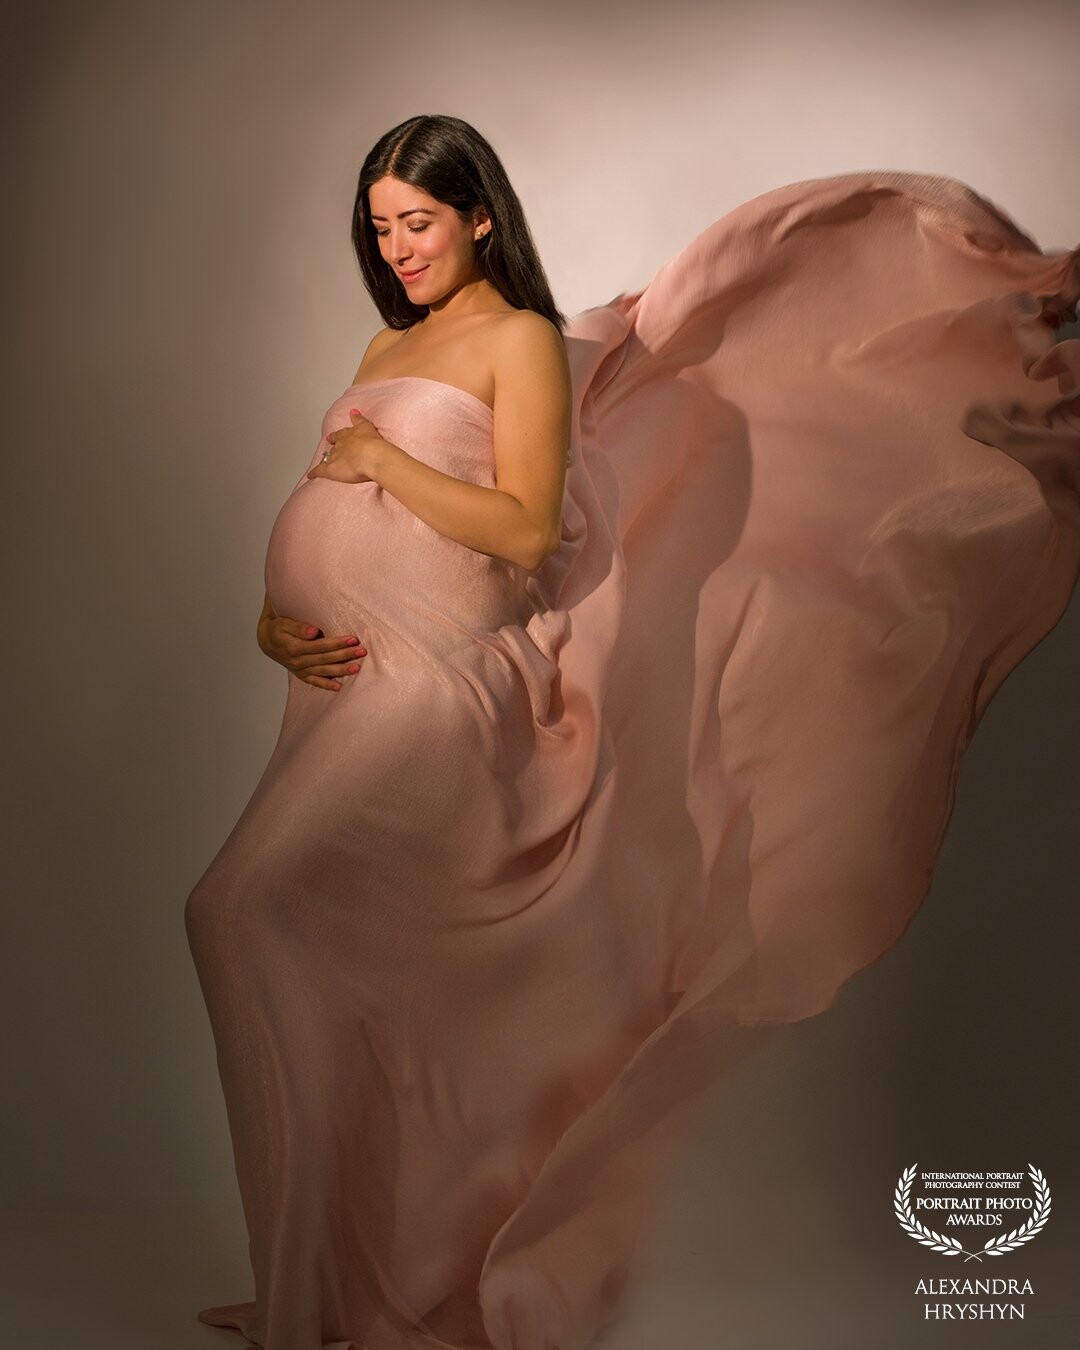 The precious moments of pregnancy. Maternity photo shoot with Material toss in Los Angeles photo studio.<br />
We chose light pink silk fabric and pastel color palette